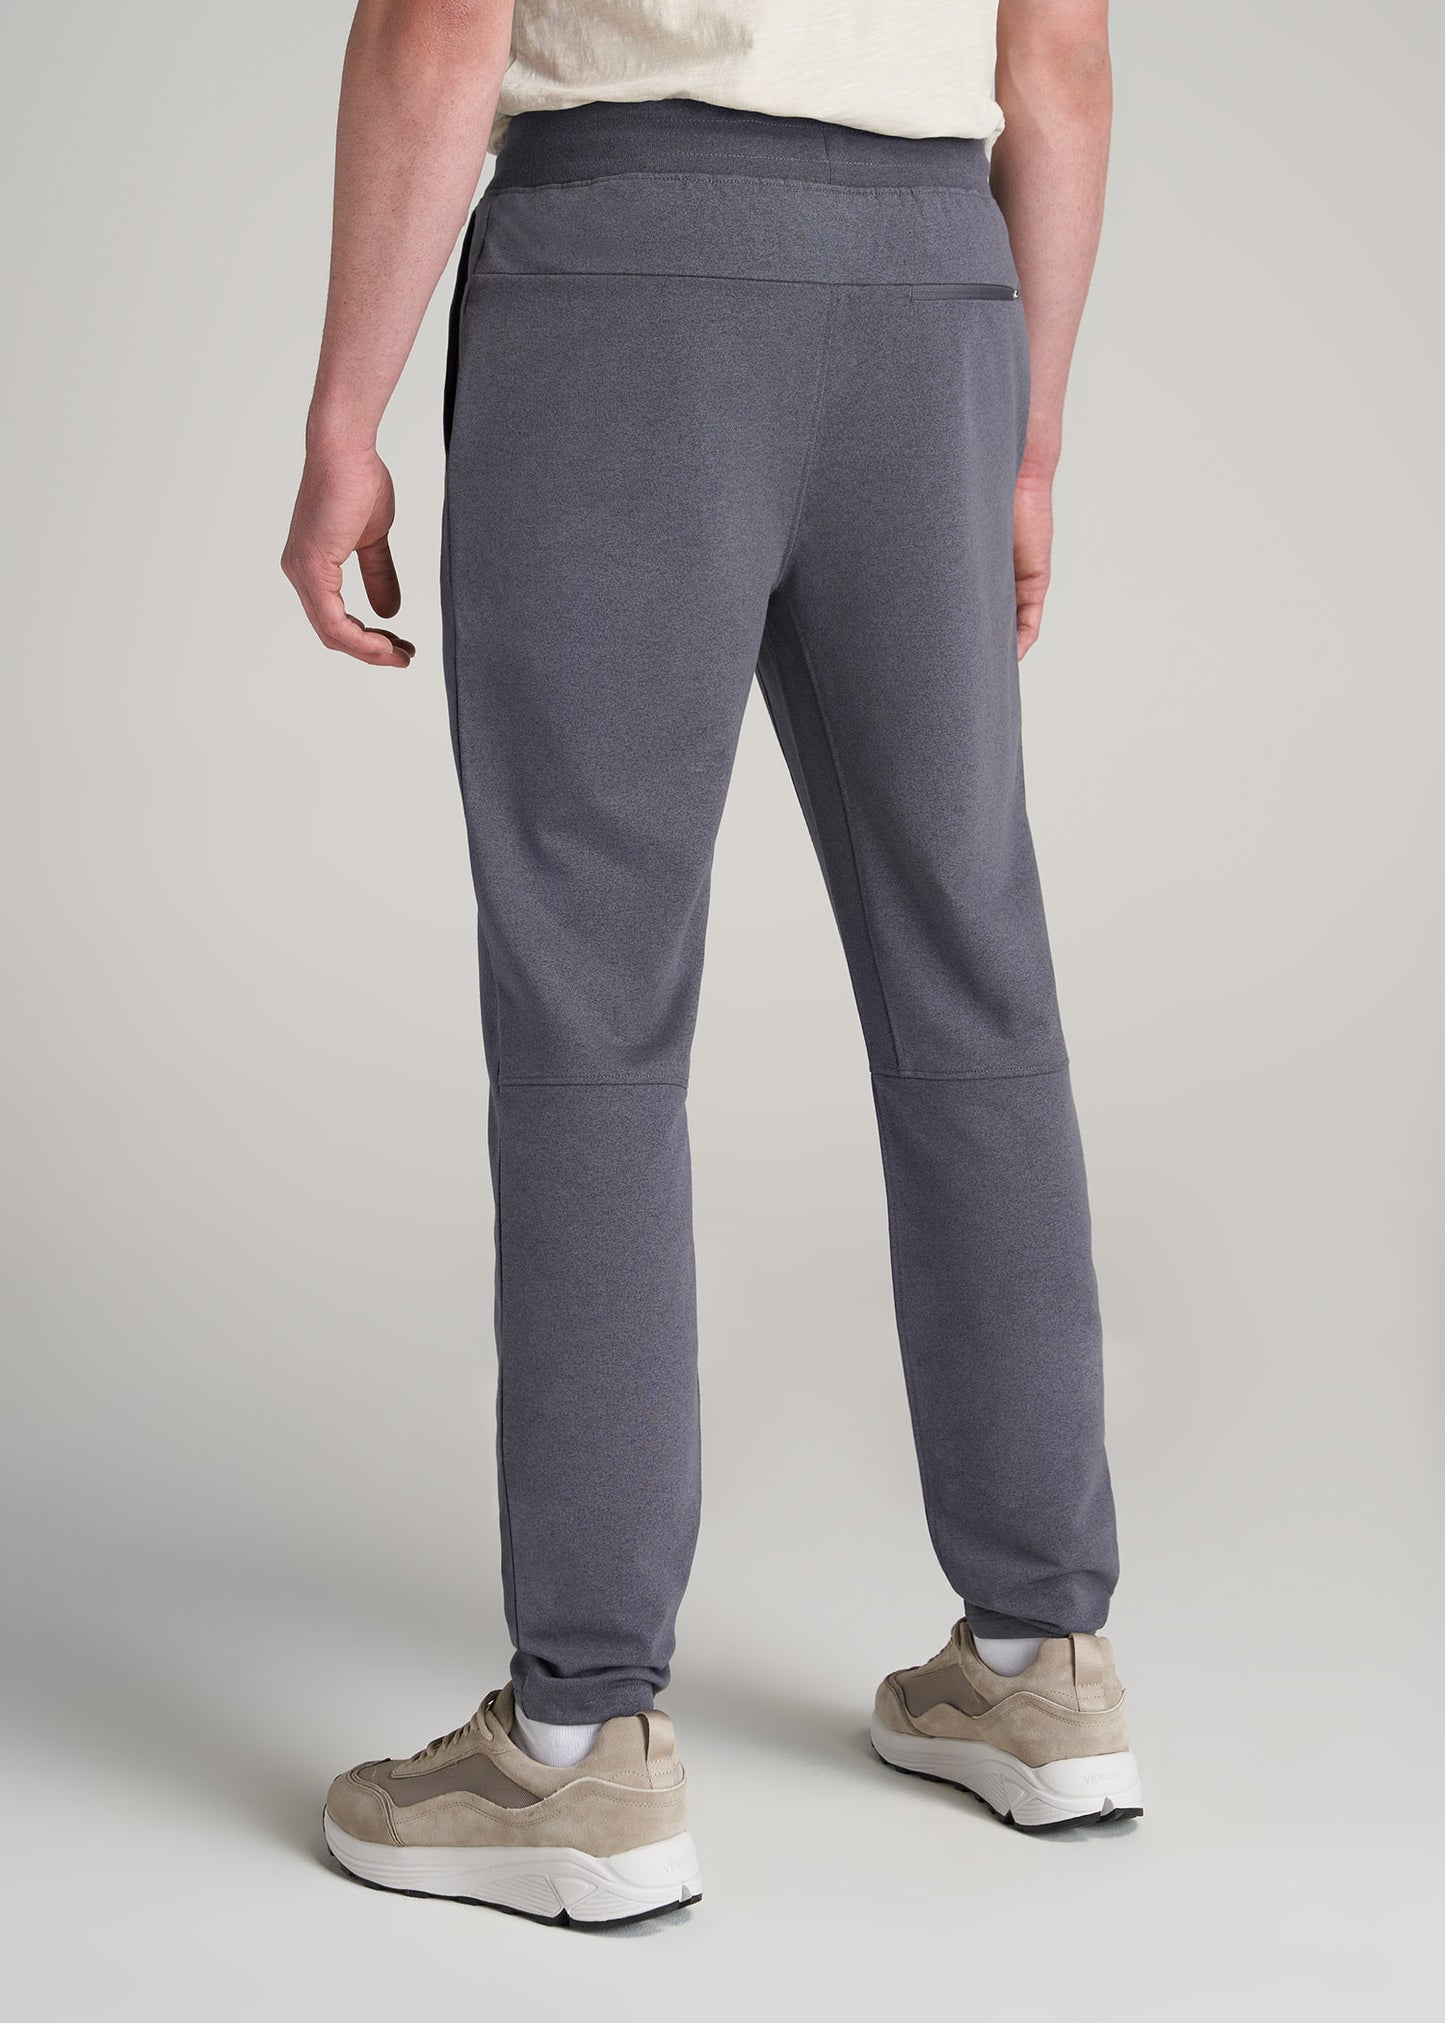       American-Tall-Men-Performance-Tapered-French-Terry-Sweatpants-Charcoal-Mix-back